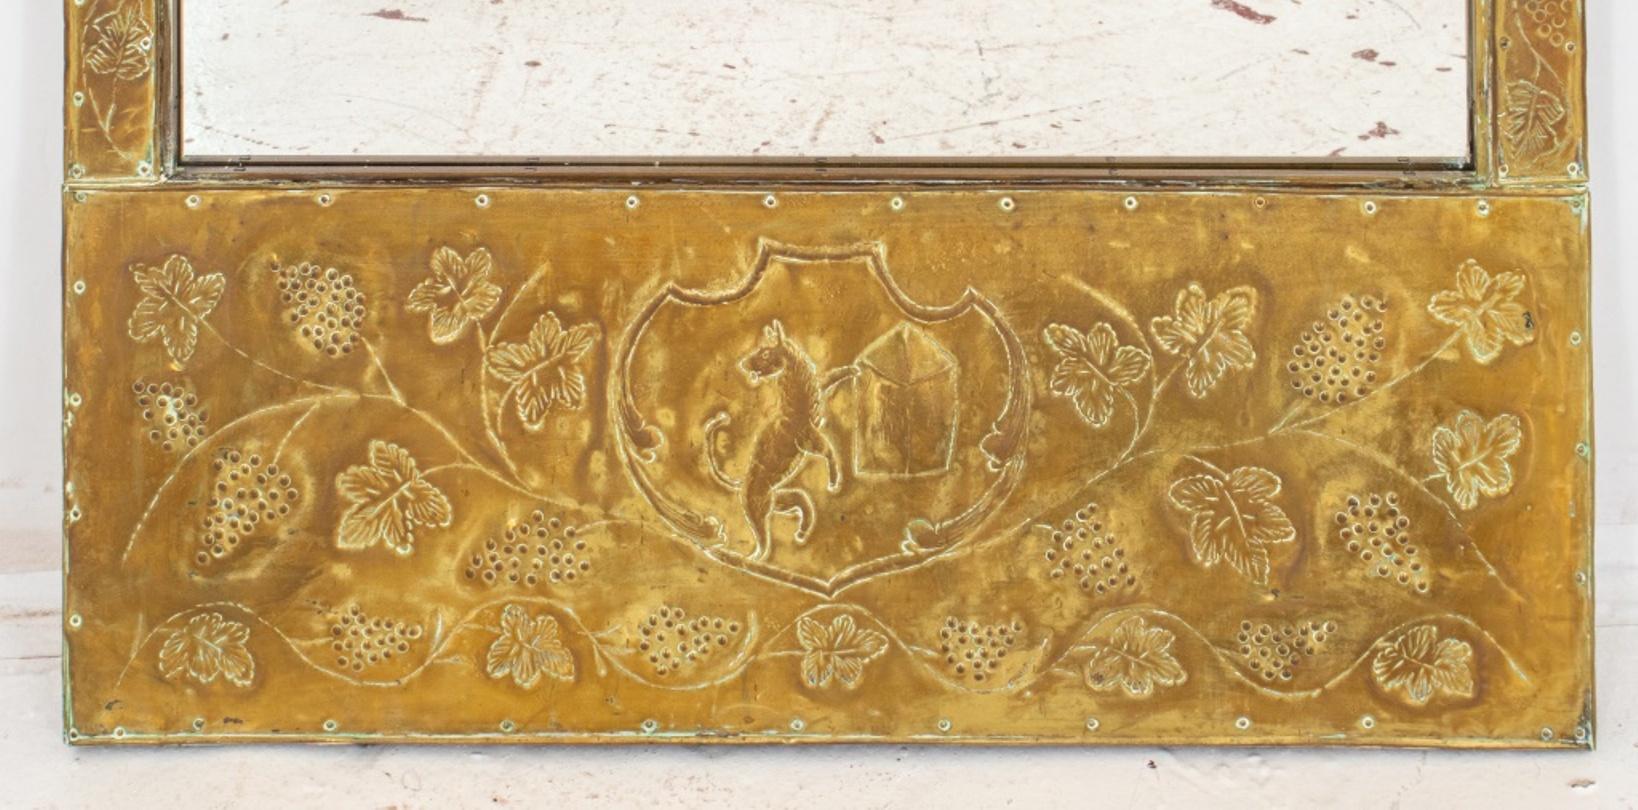 European repousse brass framed mirror, possibly Spanish or Italian, the trumeau with armorial bearings and the rest with an allover grapevine pattern, centering a rectangular mirror plate,

Dimensions: Mirror: 36.5